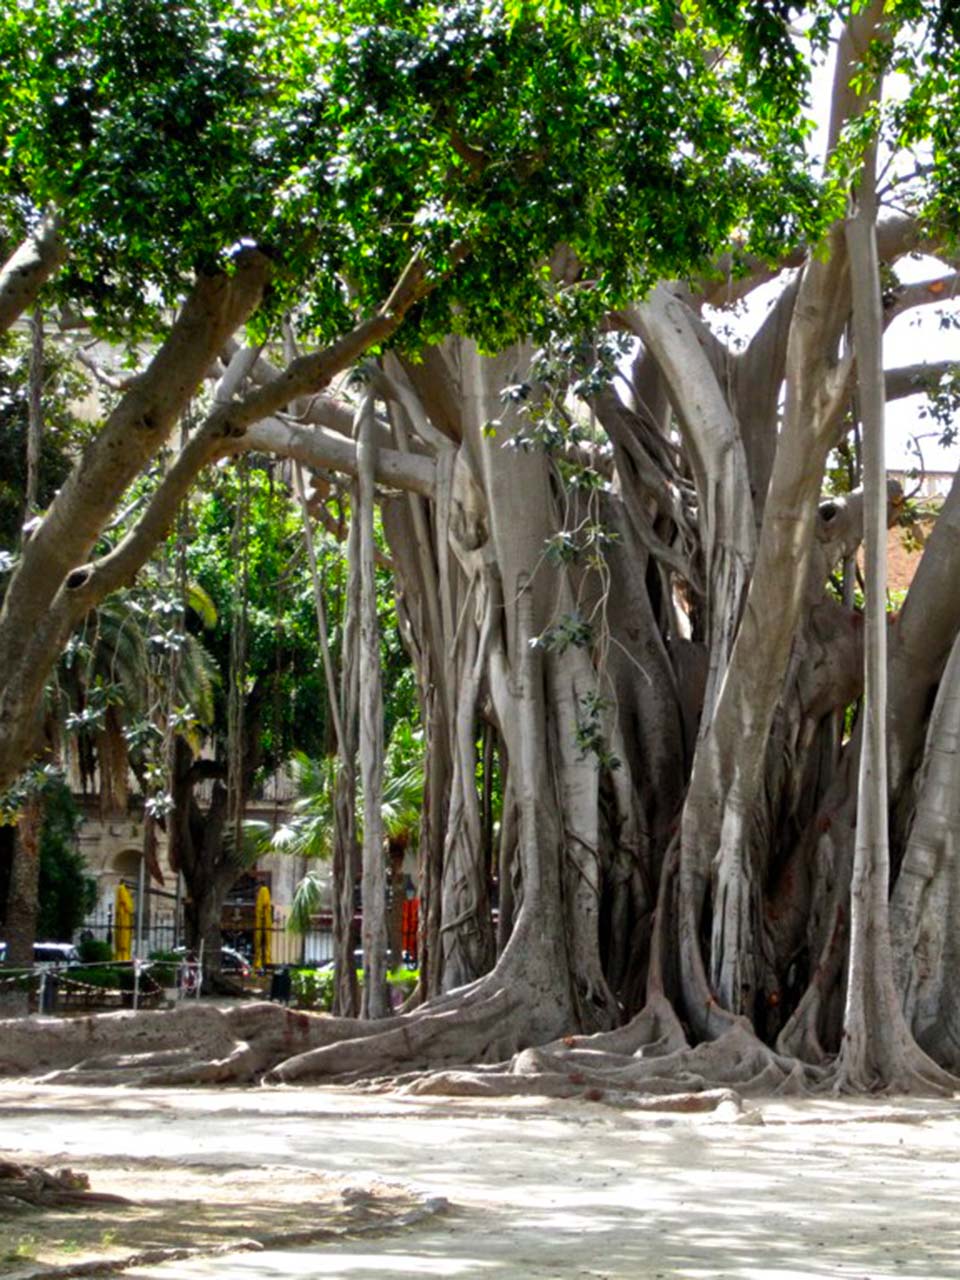 centuries-old ficus in Piazza Marina in Palermo